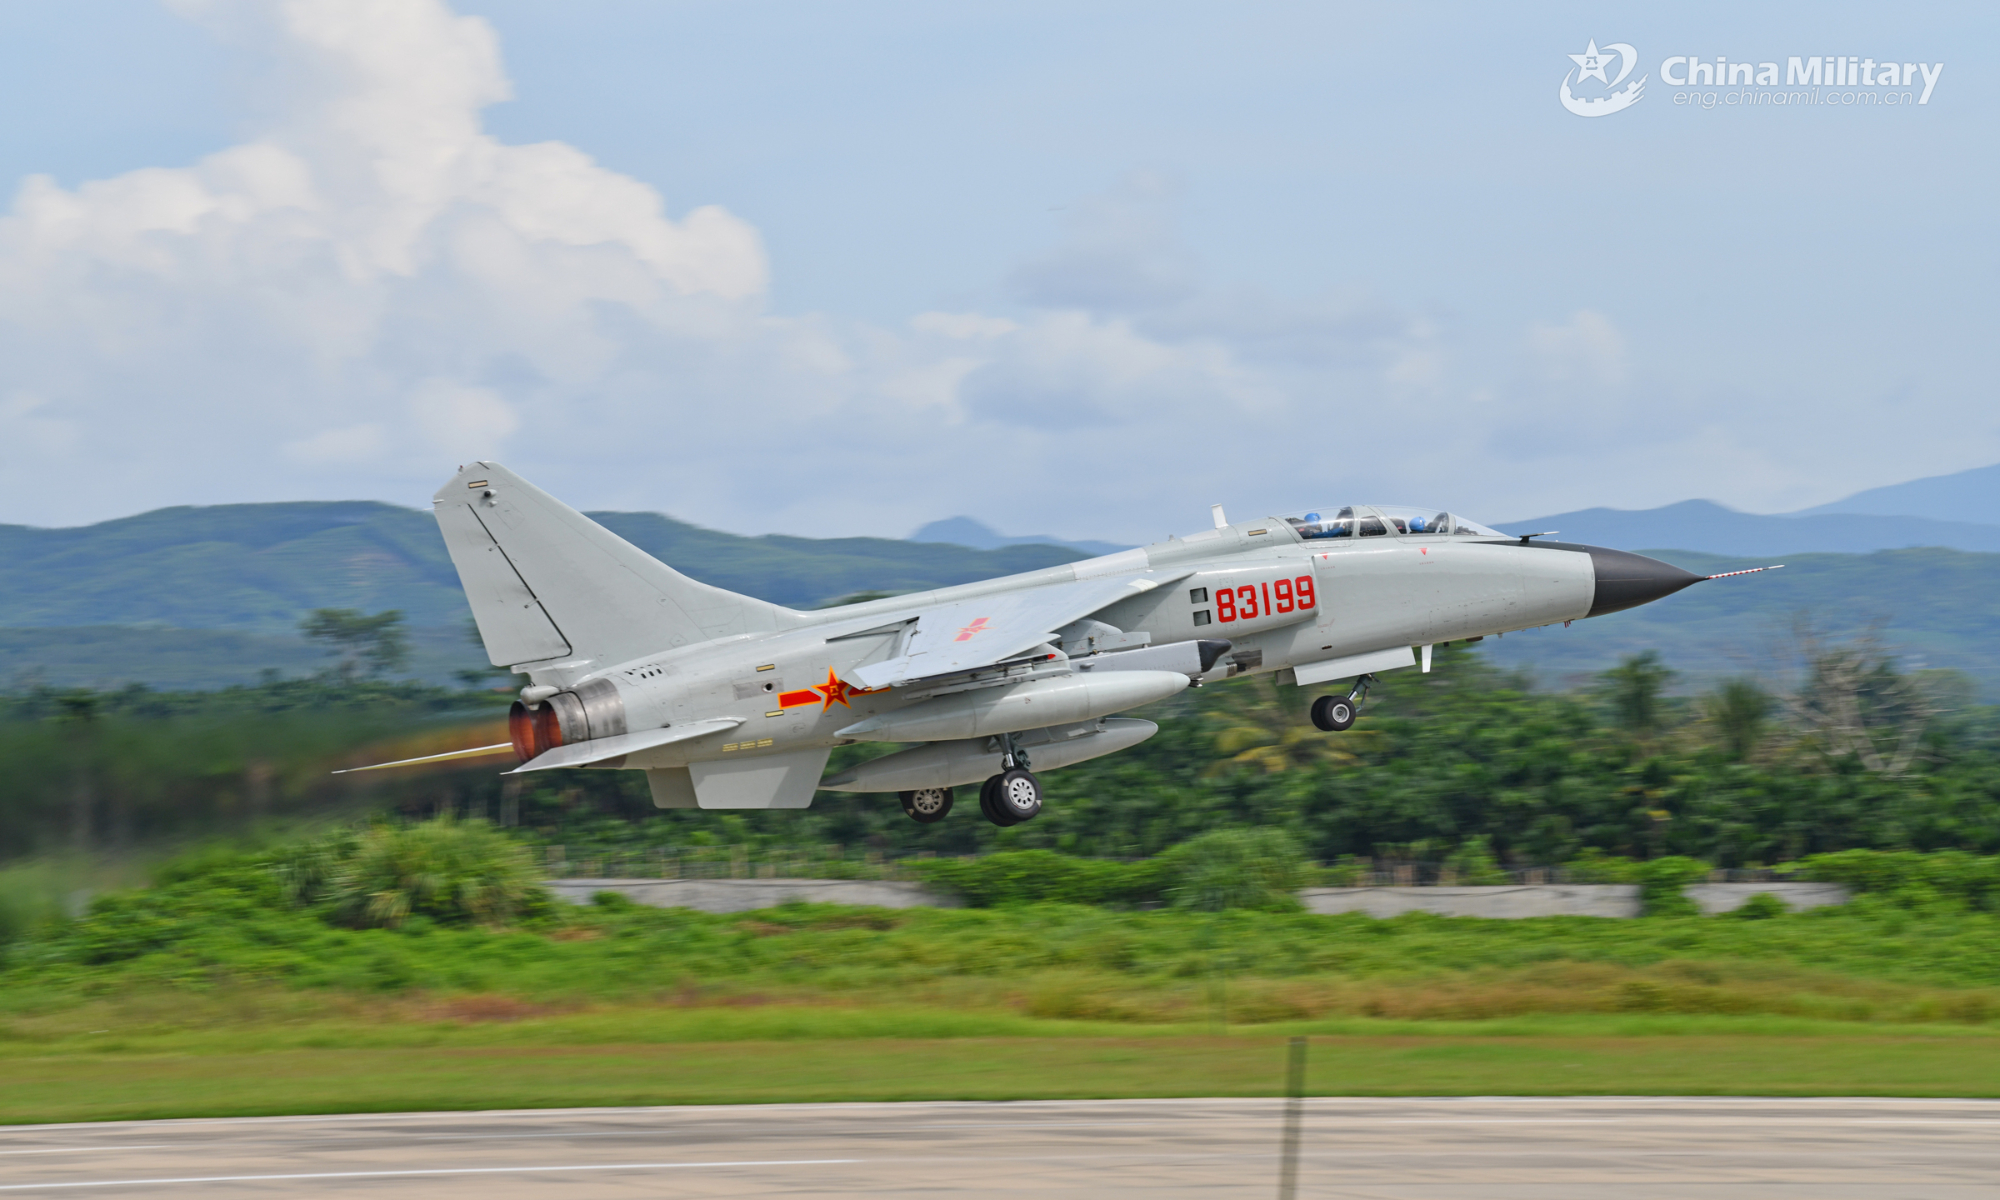 A fighter bomber attached to a naval aviation brigade under the PLA Southern Theater Command takes off from the runway during a flight training exercise on August 24, 2022. (eng.chinamil.com.cn/Photo by Zhuo Lingpeng)